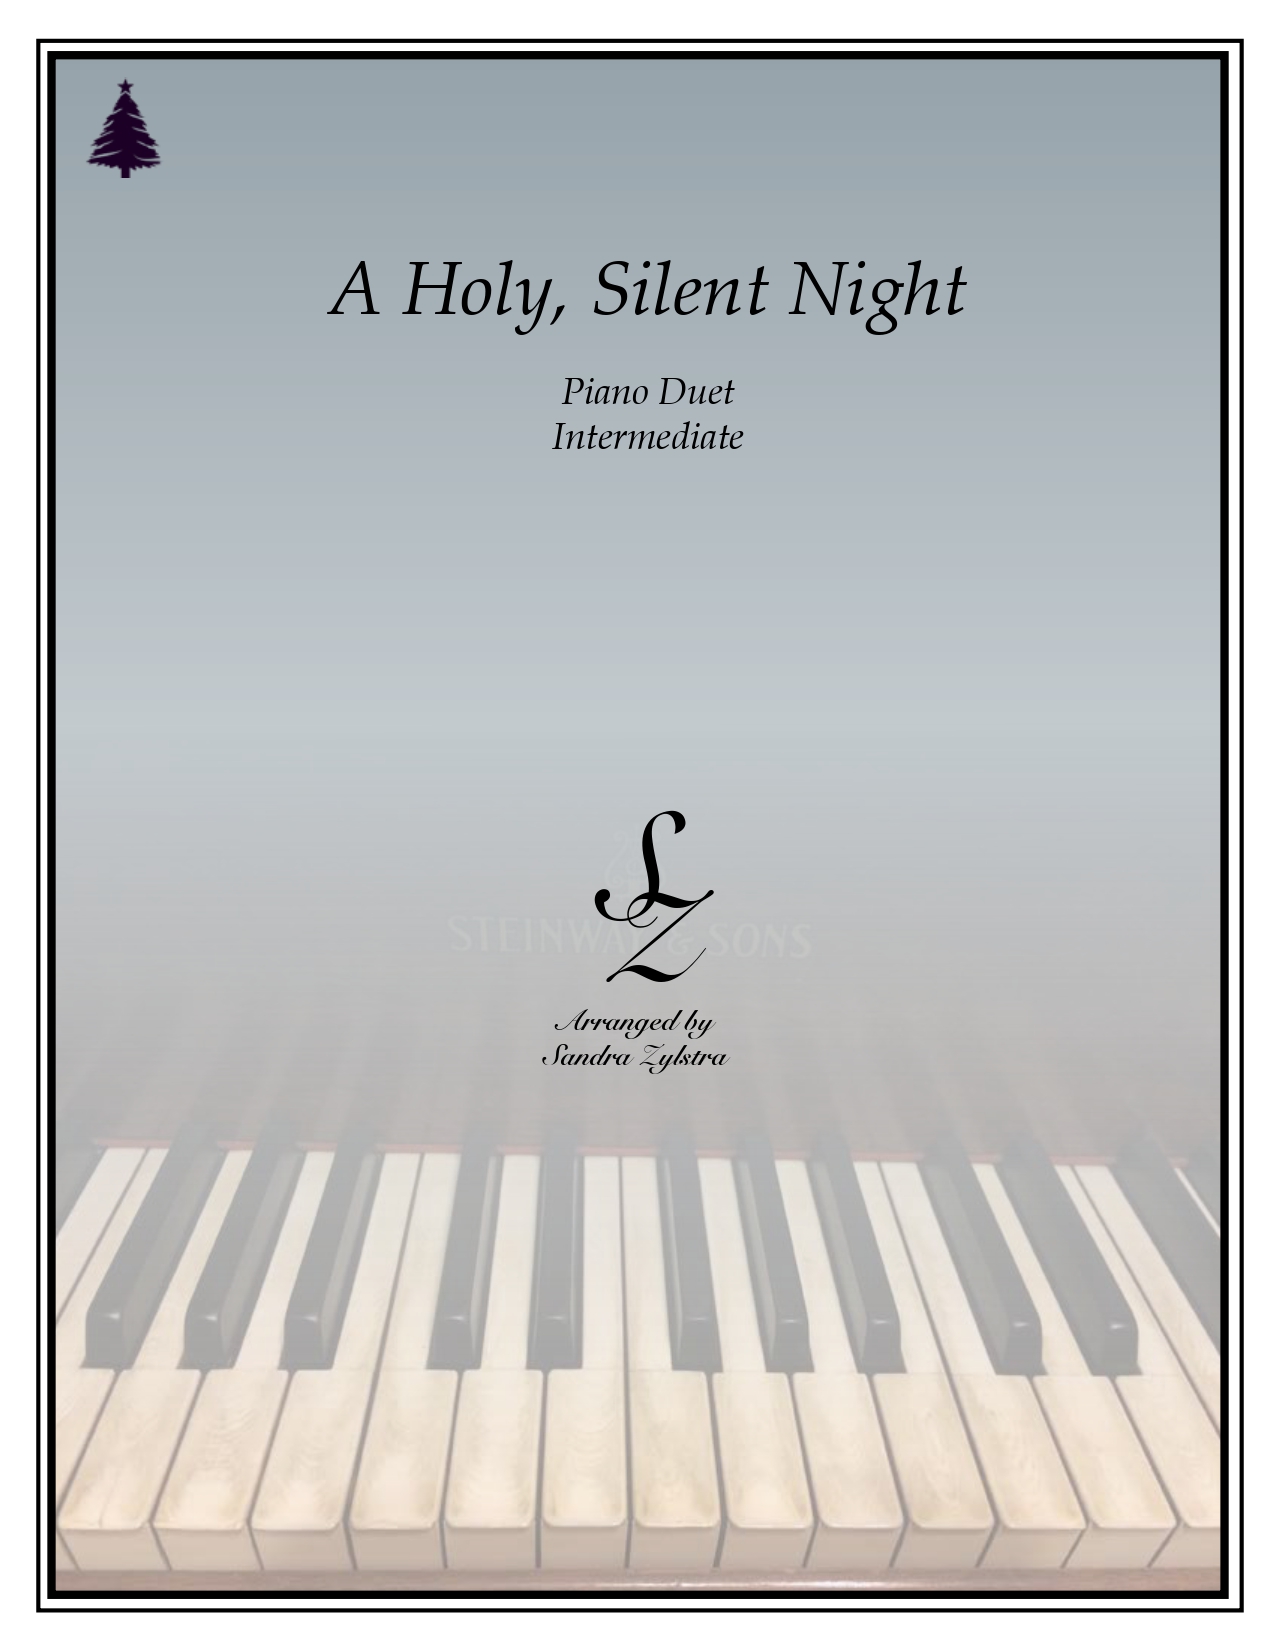 A Holy Silent Night intermediate piano duet cover page 00011